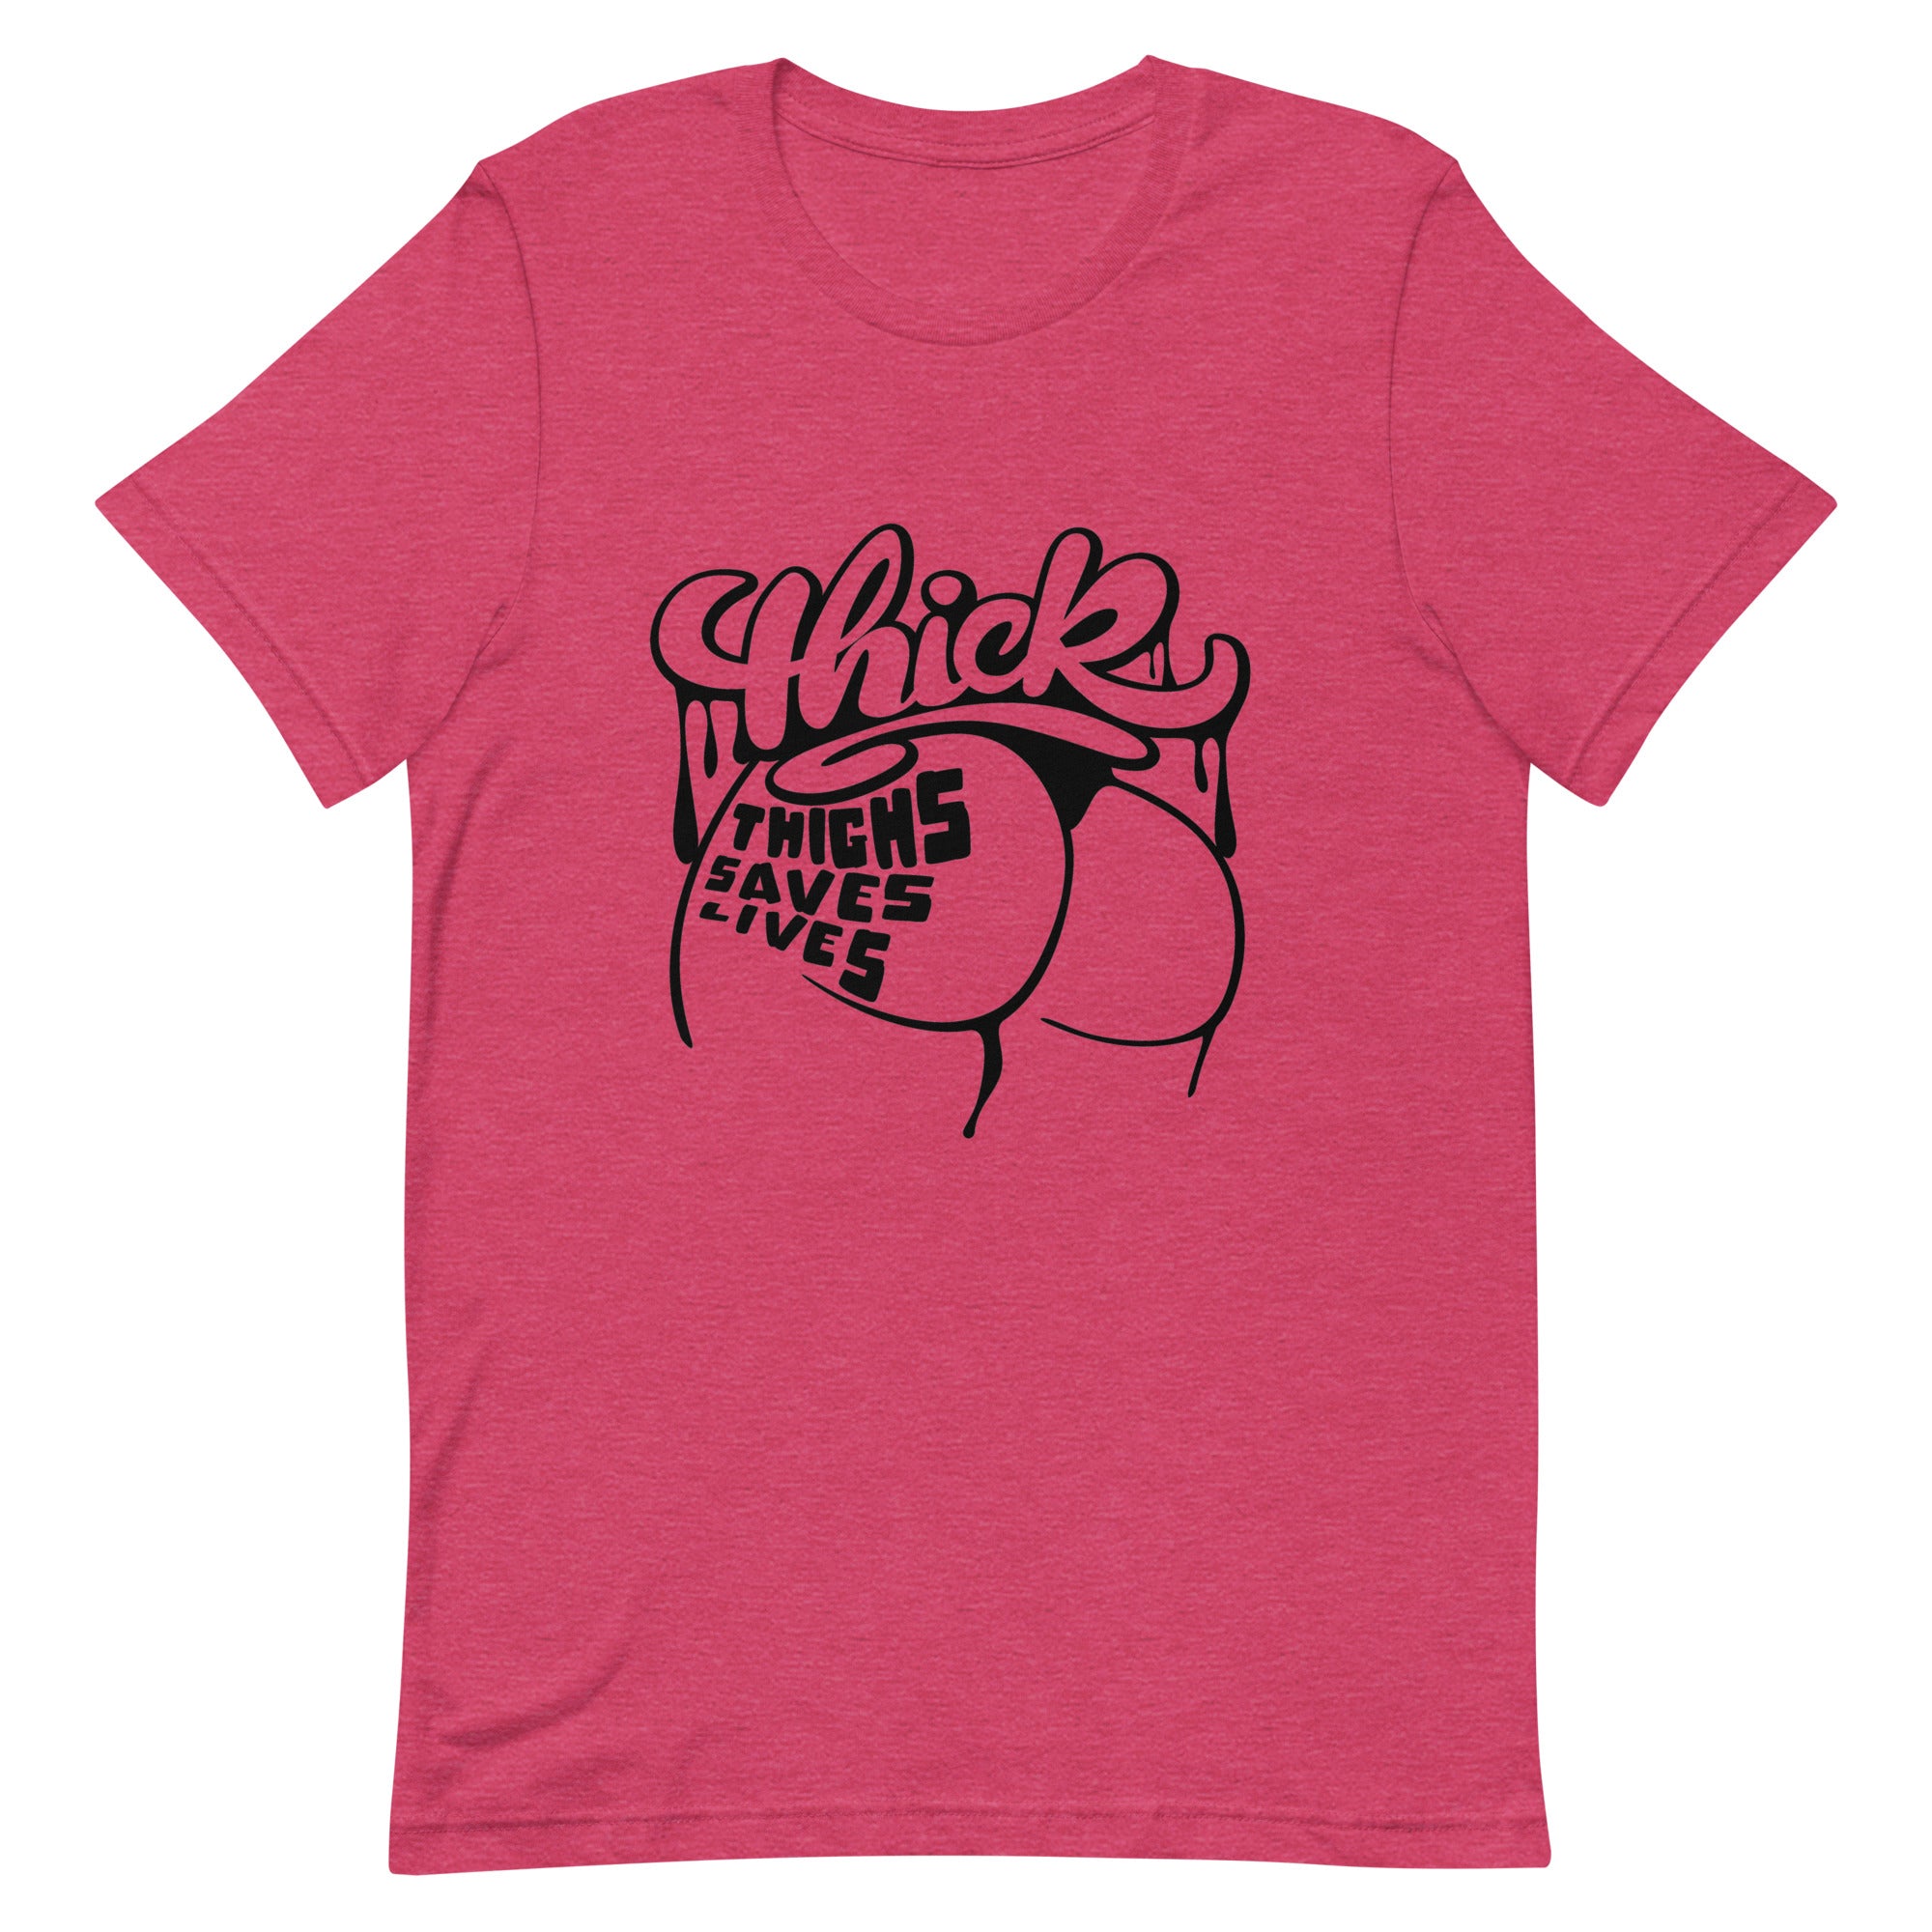 Ladies Thick Thighs T-Shirt